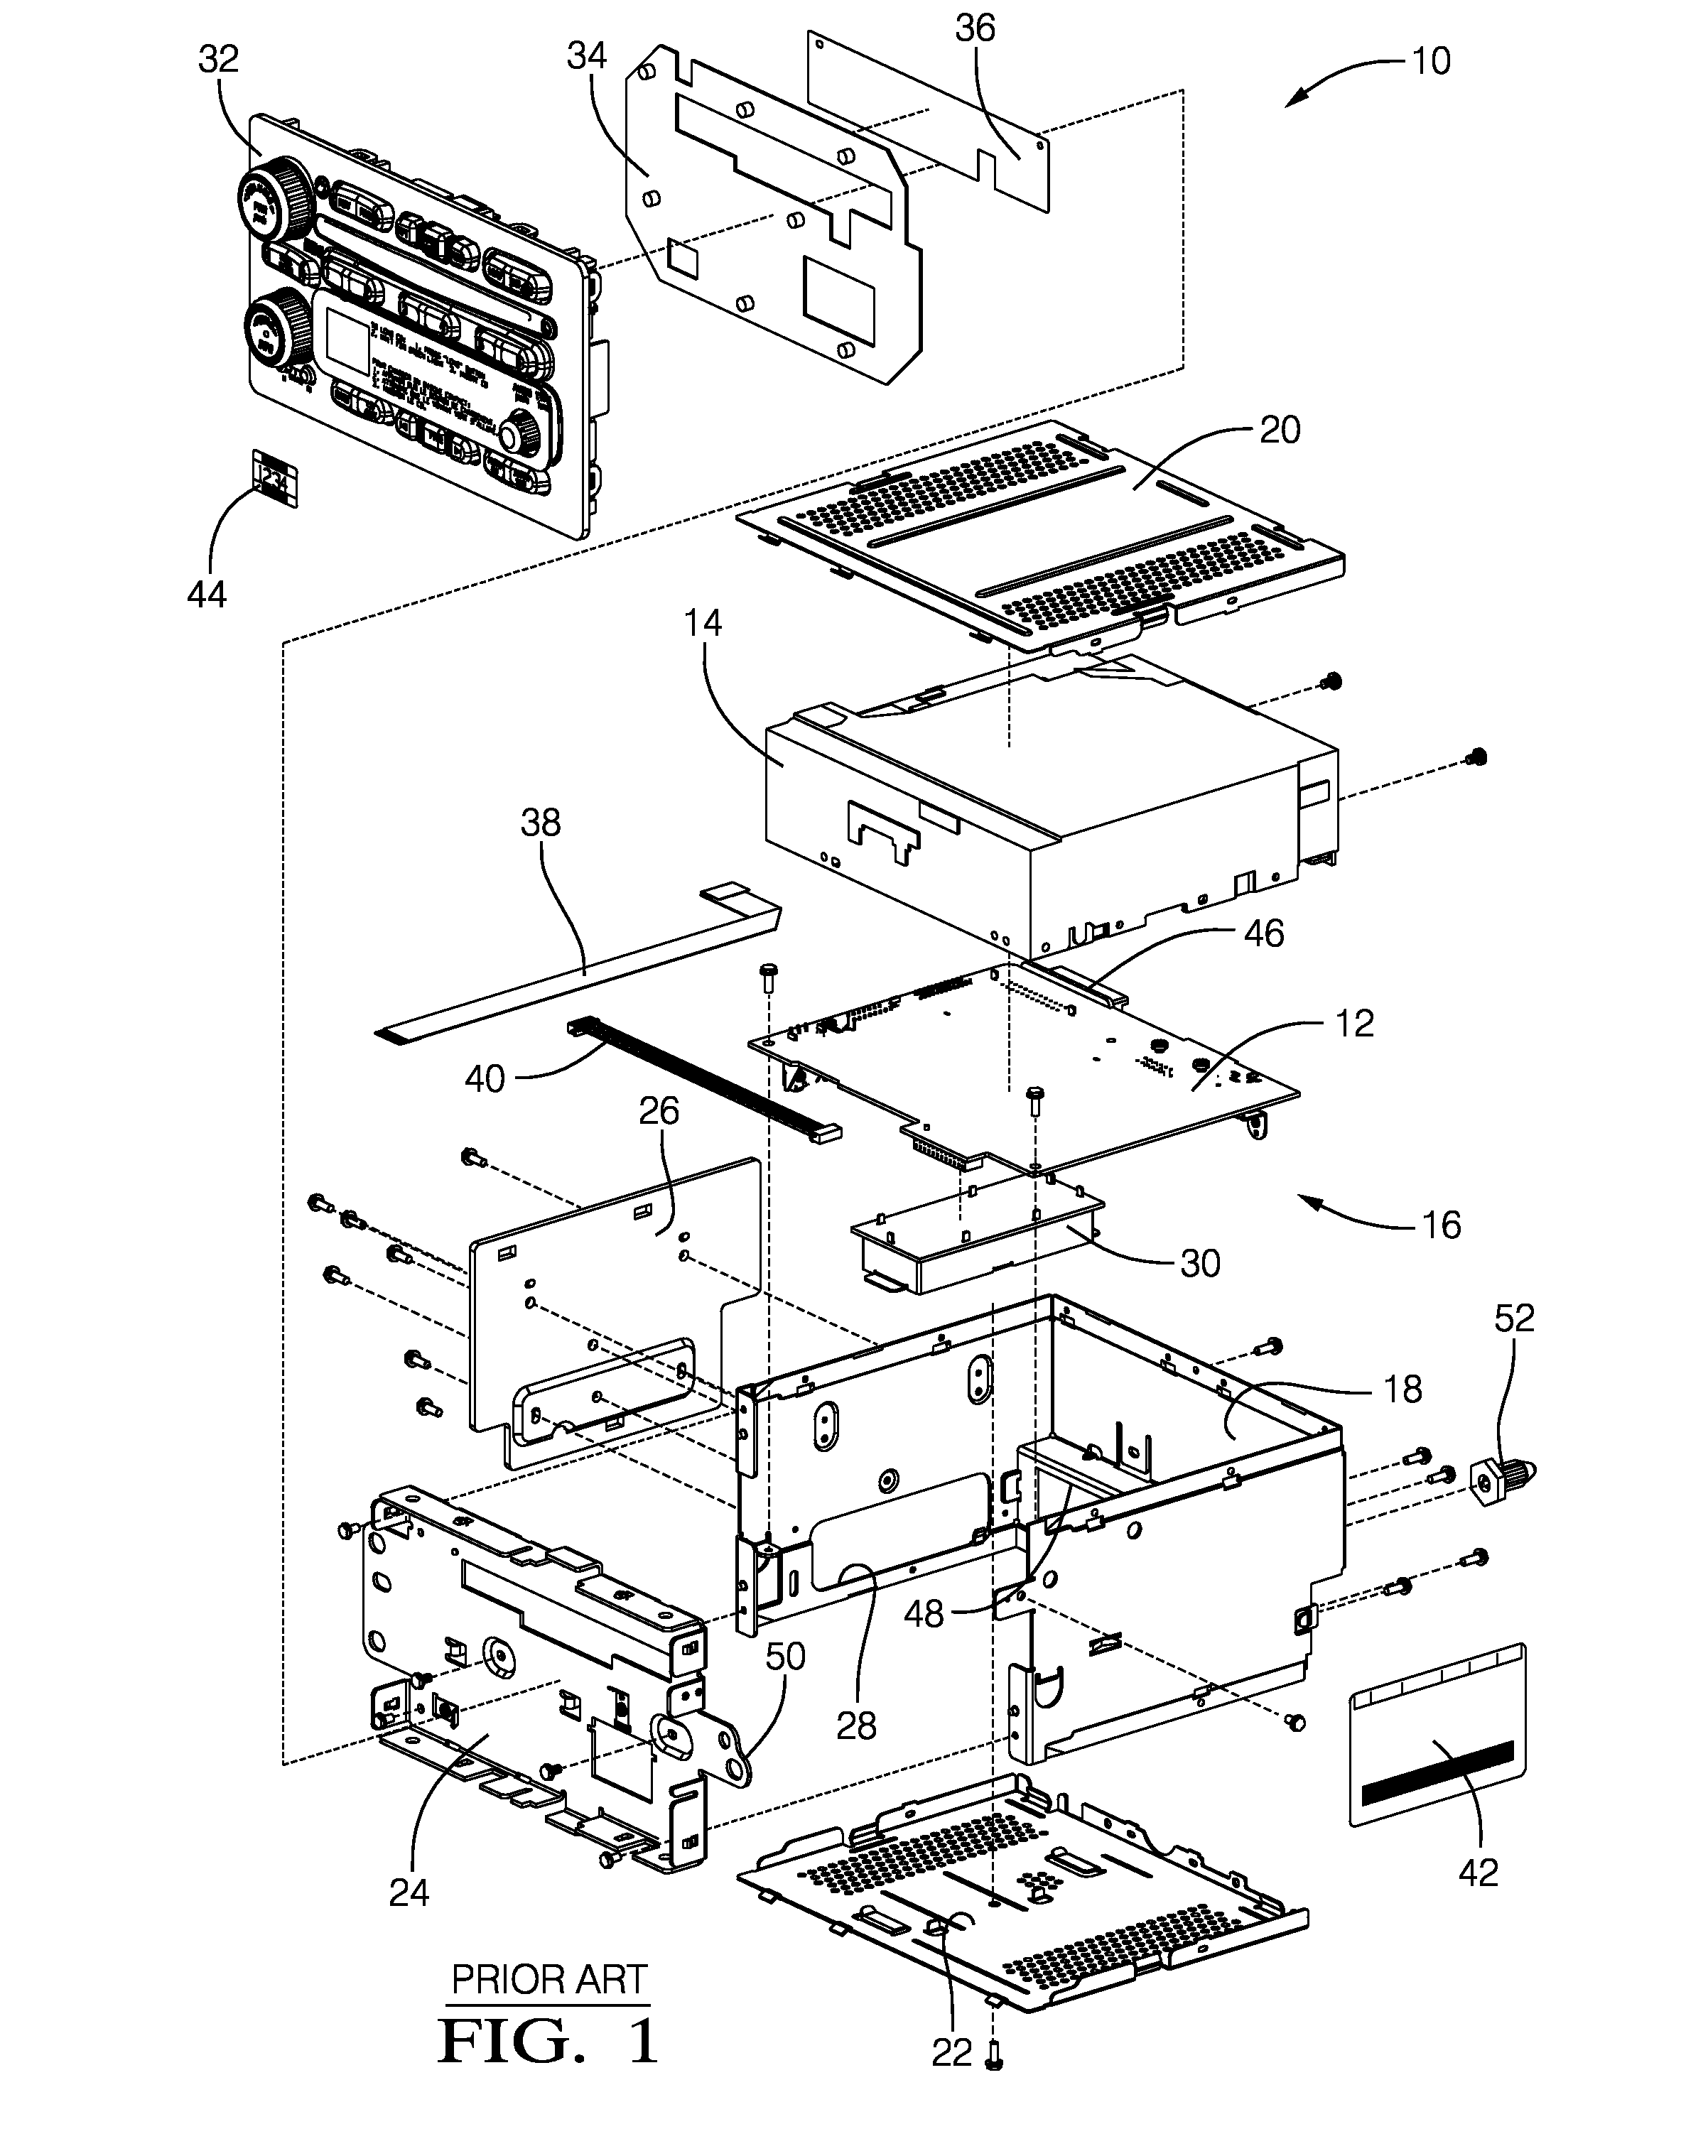 Lightweight electrical assembly with enhanced electromagnetic shielding